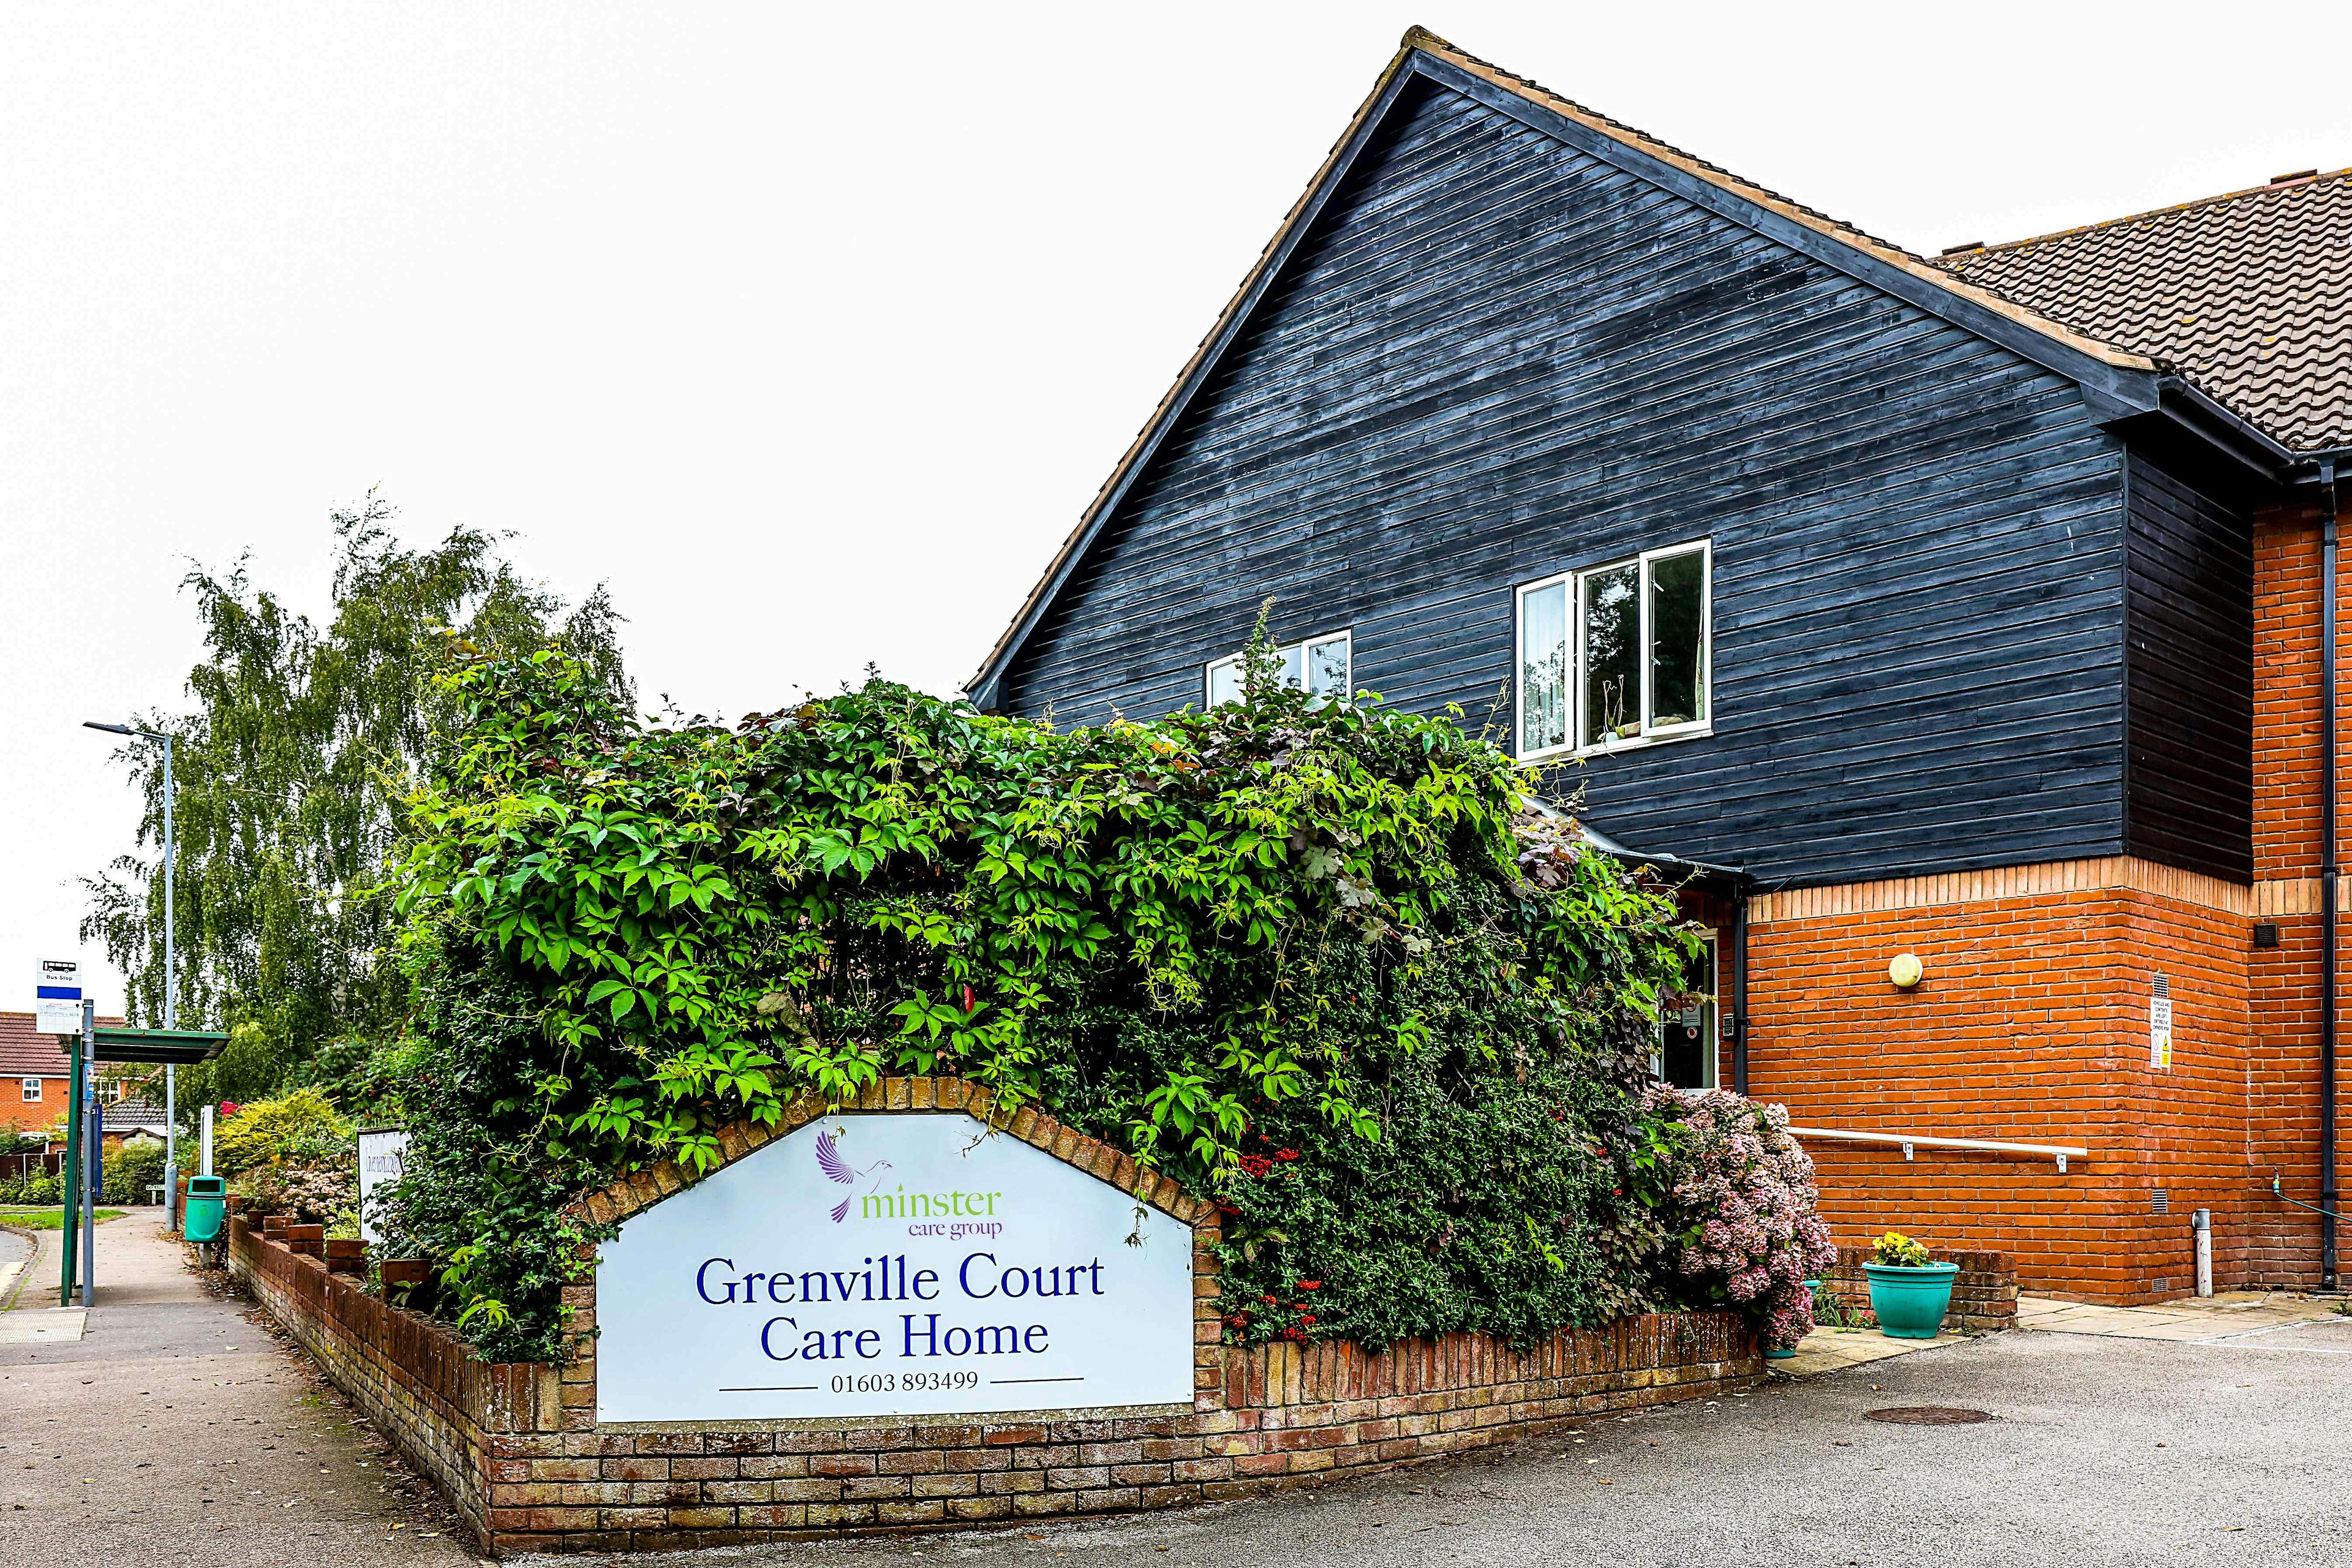 Grenville Court care home